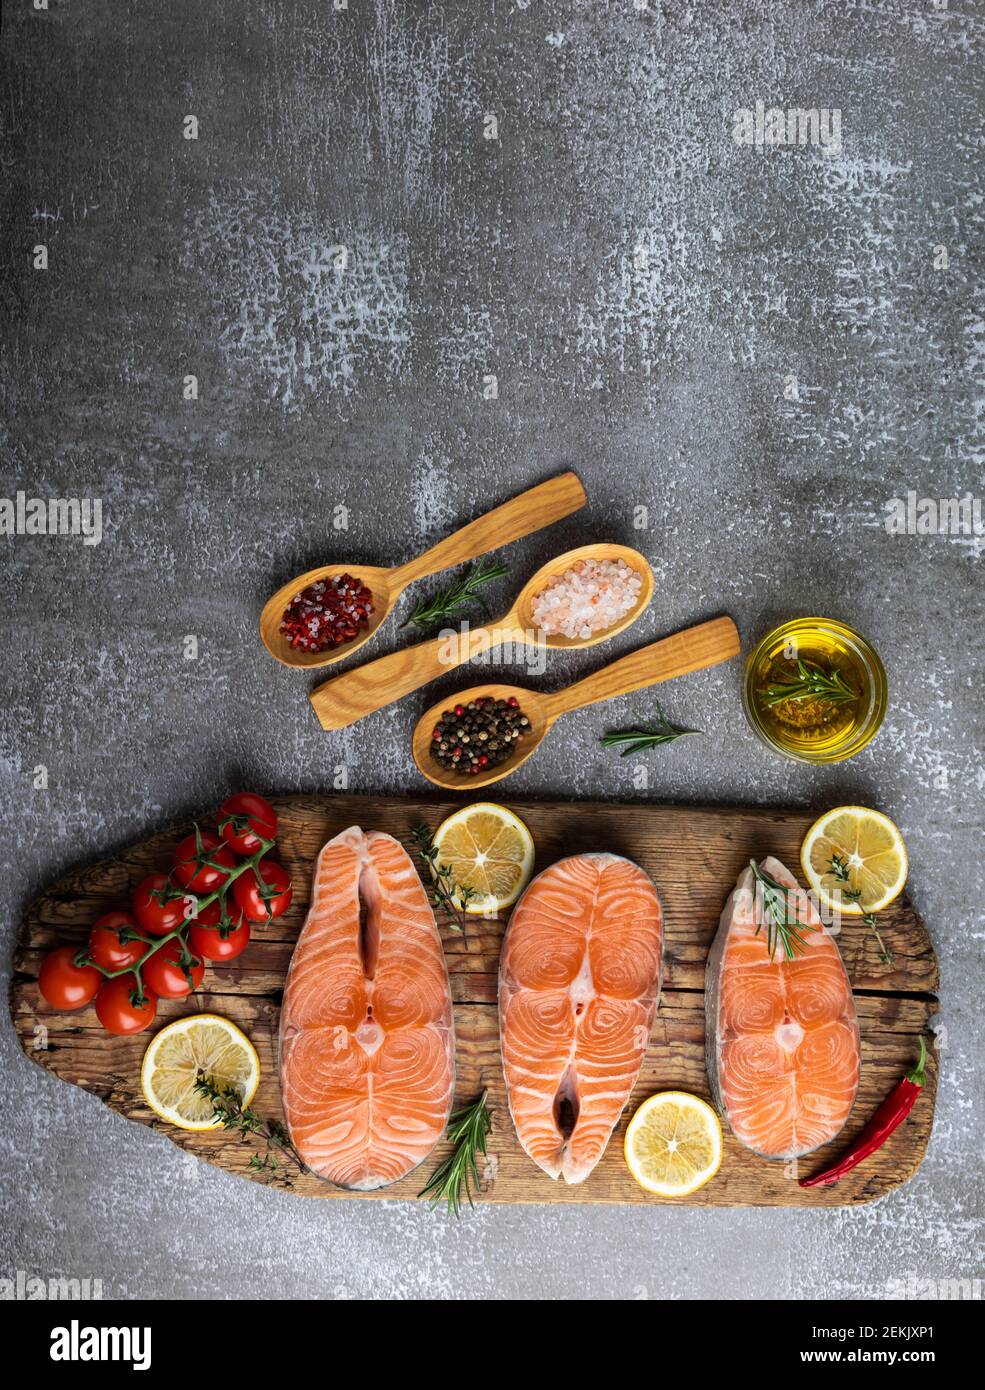 three raw steak fish trout, salmon and spices on wooden board, dark background Stock Photo